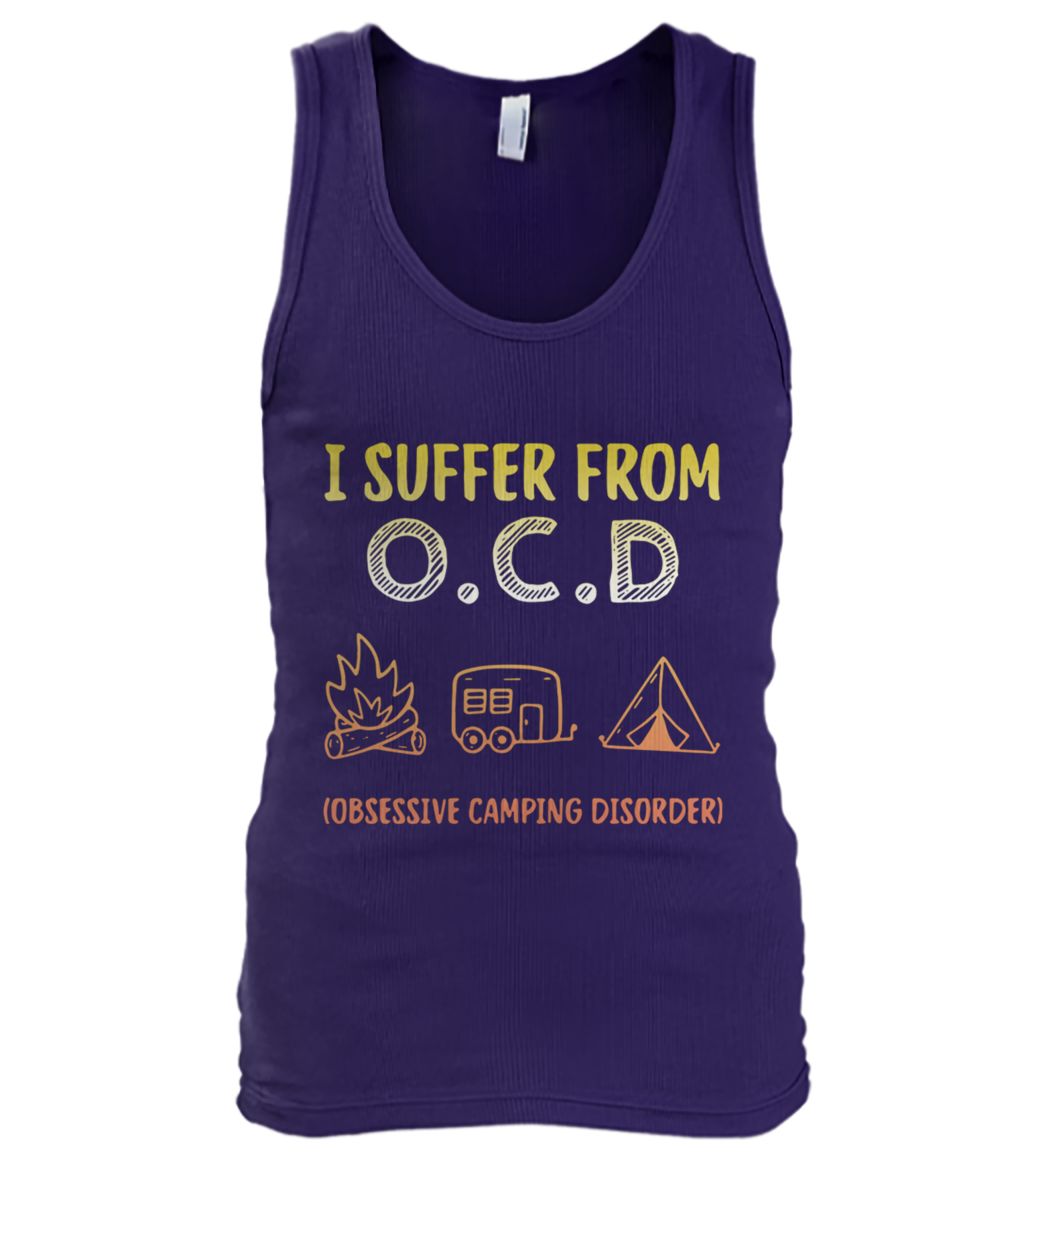 I suffer from OCD obsessive camping disorder men's tank top